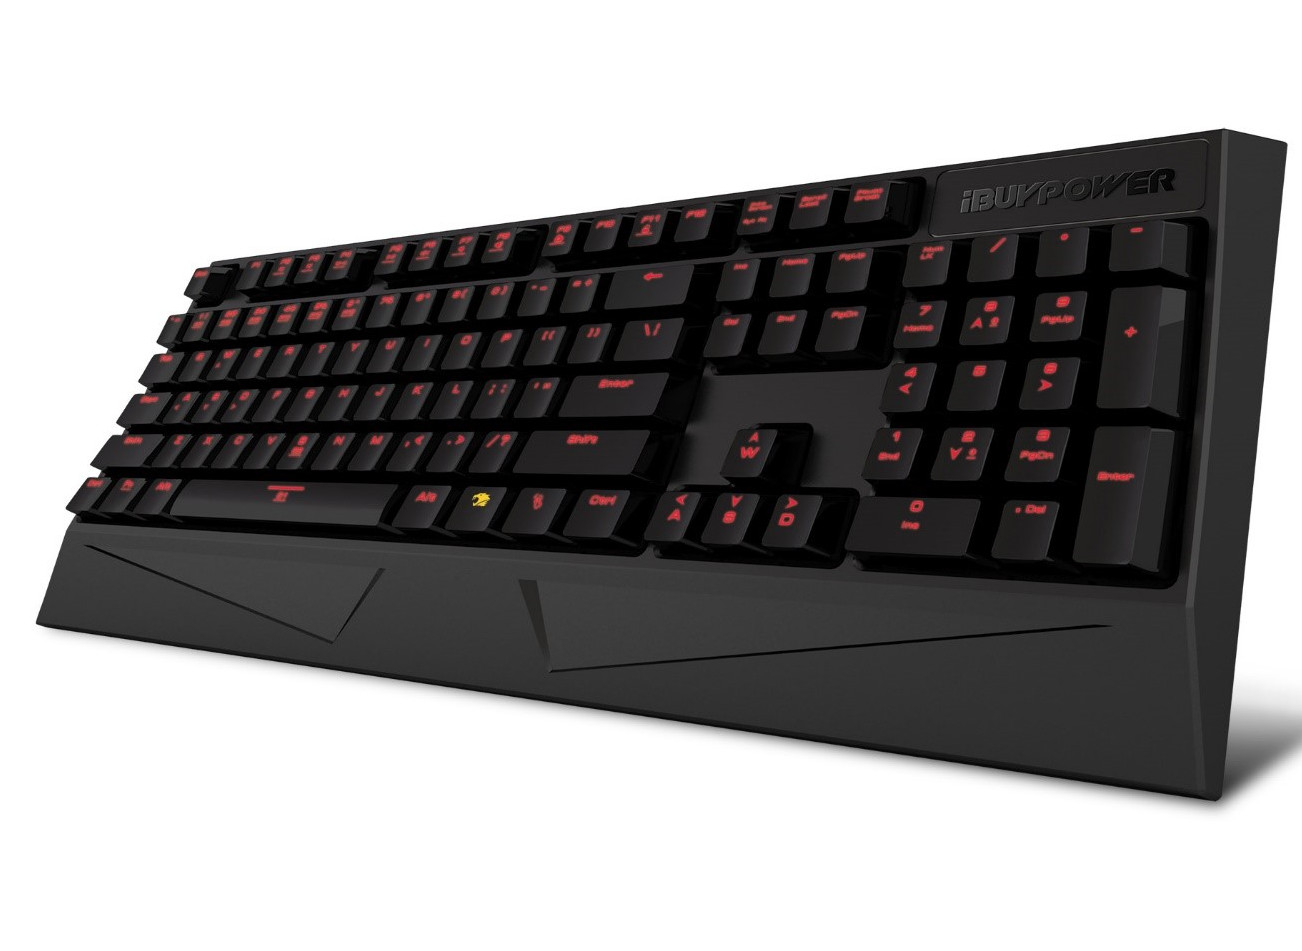 iBUYPOWER Expands Product Line with the MEK Keyboard ...